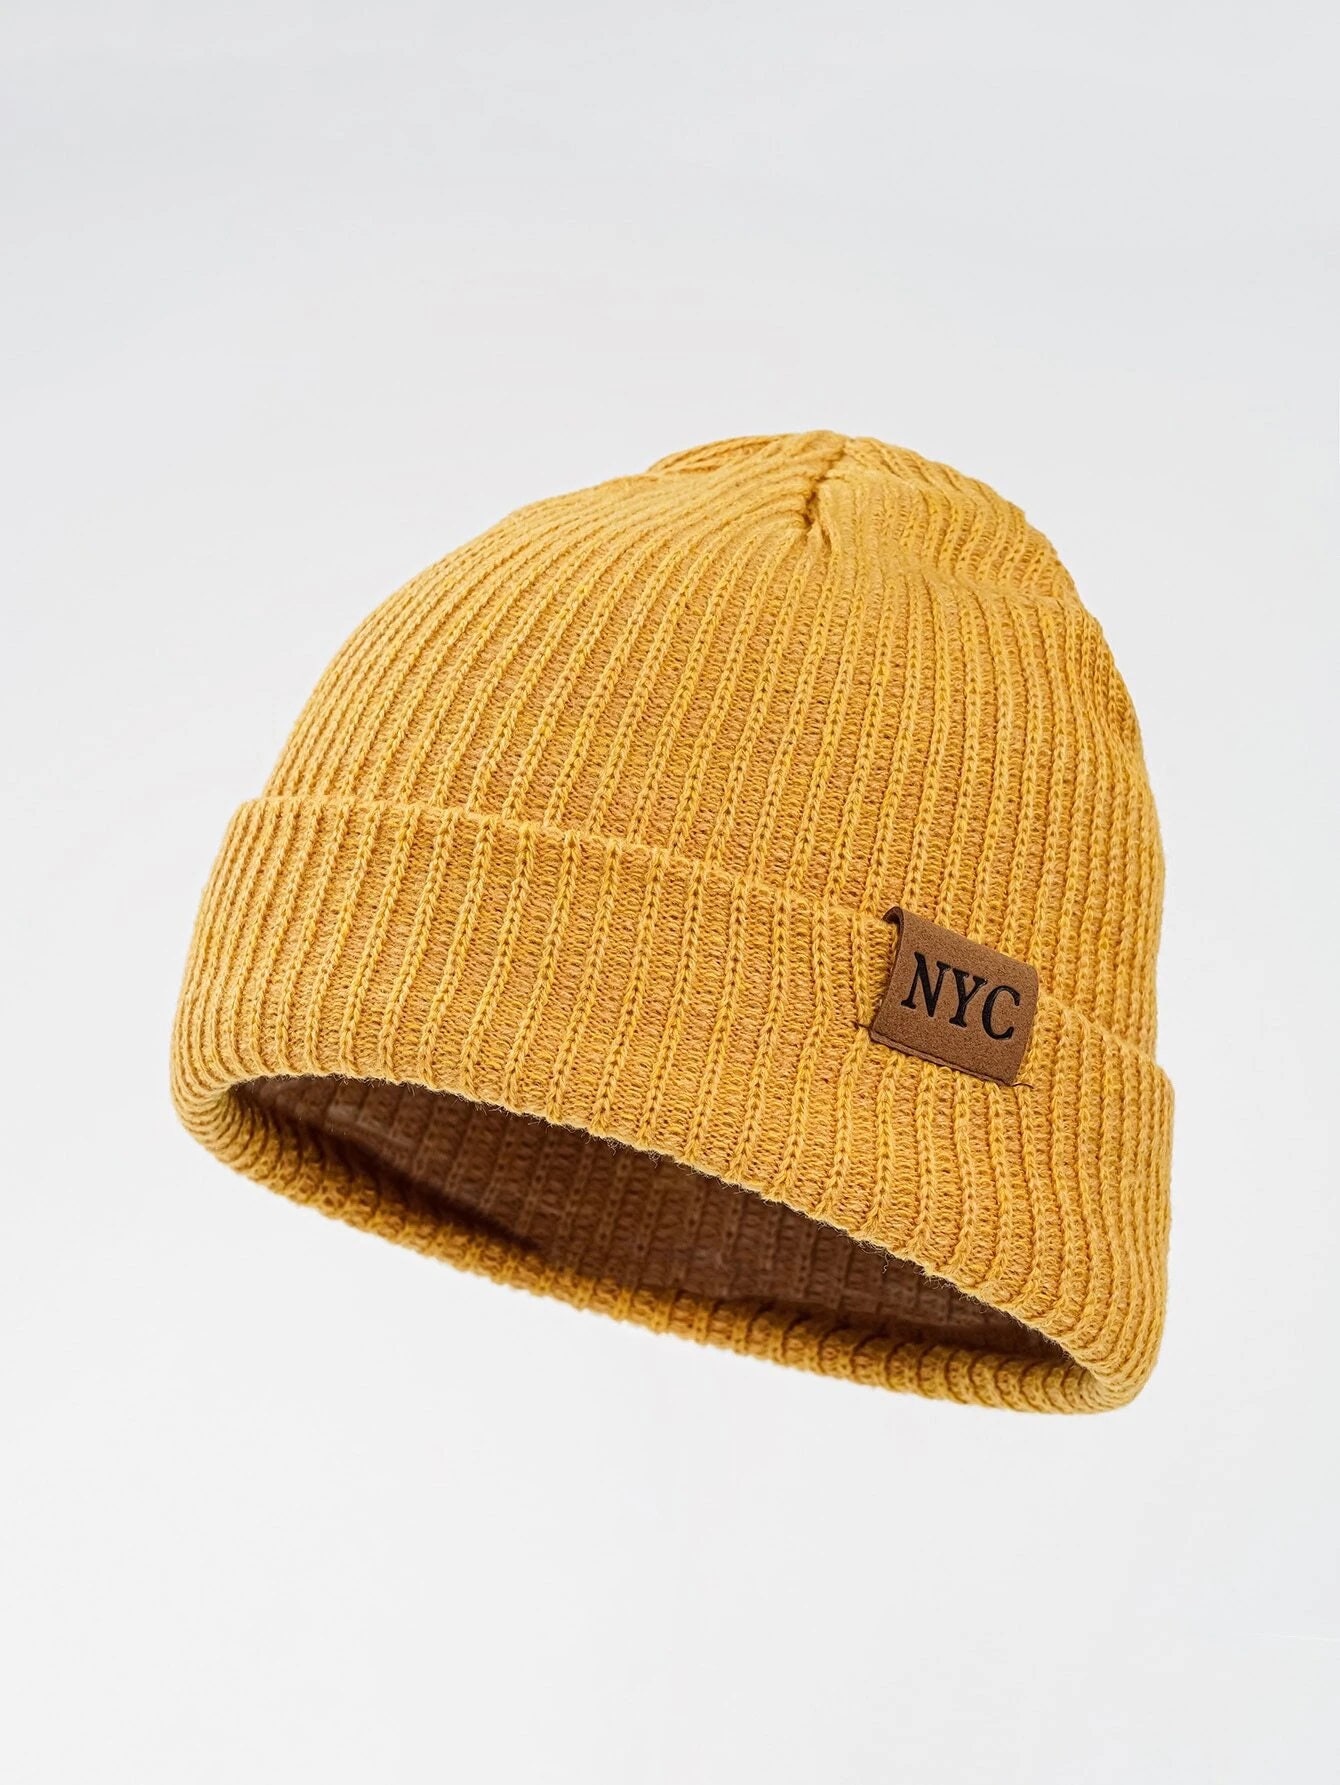 Thick Yellow Hat Thick Warm Winter Hat Yellow -